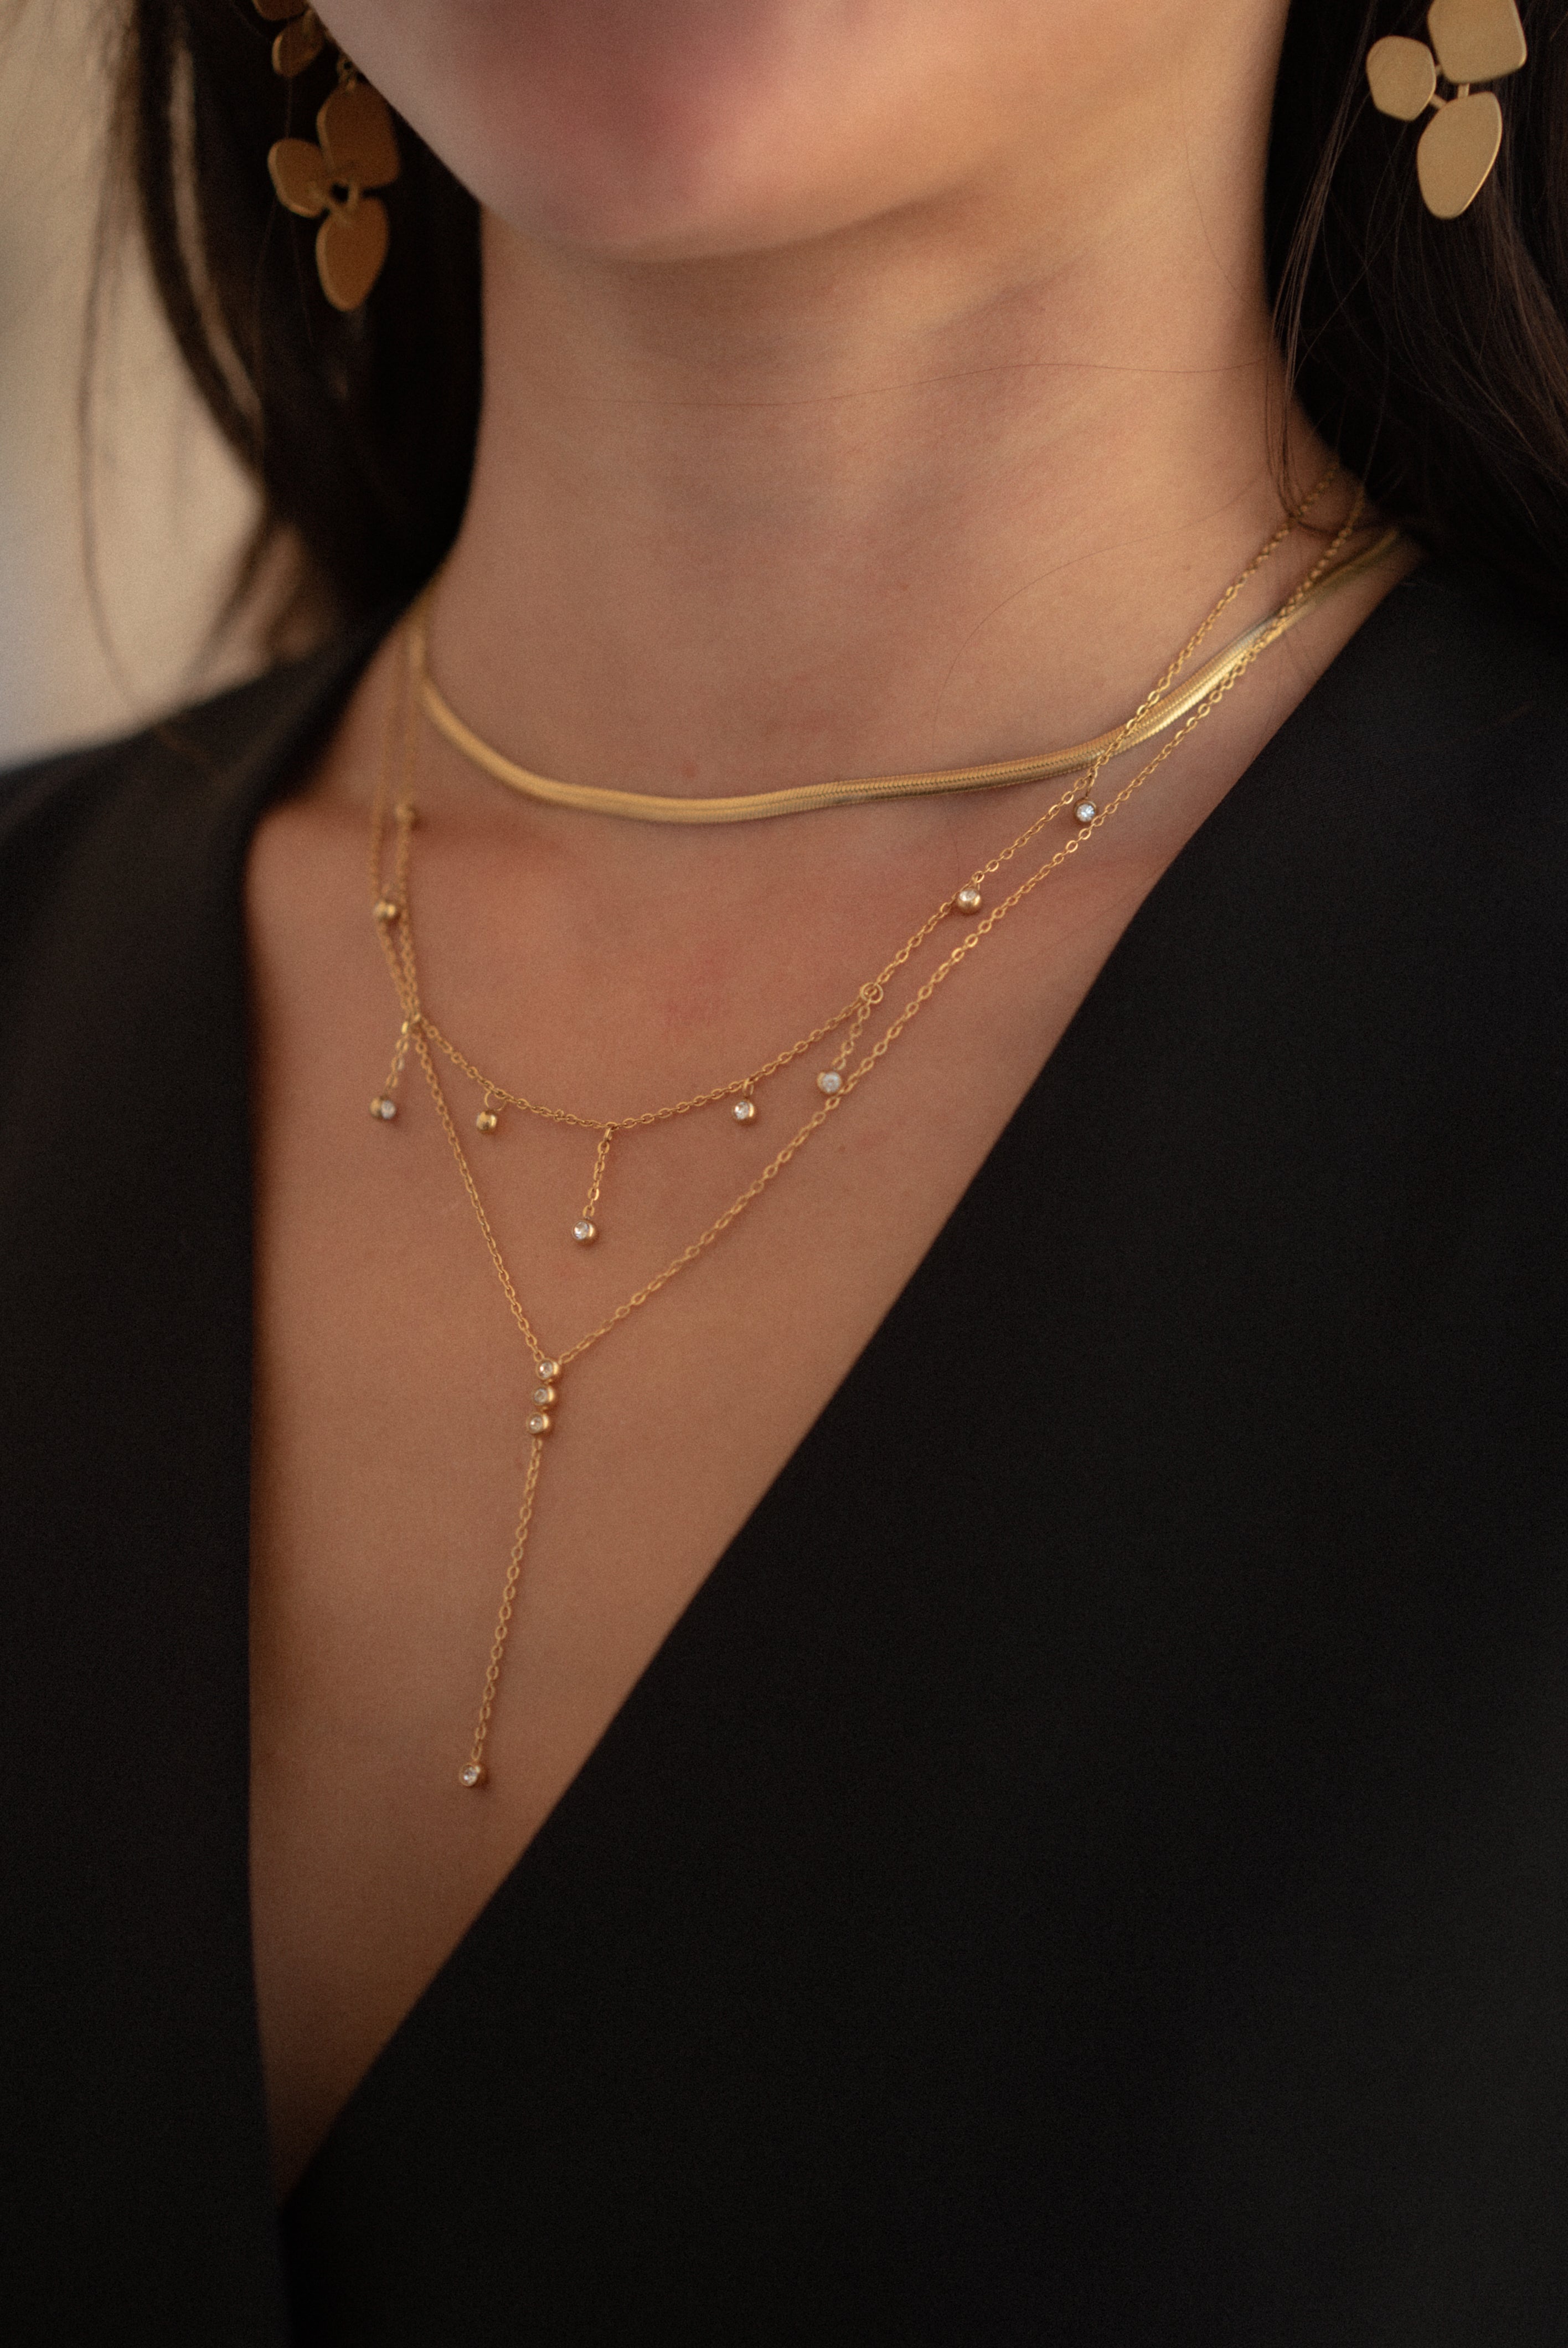 Our SIMPLE LARIAT NECKLACE was made for all you necklace stack lovers. It's simple but features three cubic zirconia (CZ) stones at the focal point to add a pop of sparkle. Wear as is, or layer it with our SENSE or AURA NECKLACE.  18k gold plated on stainless steel. Length: 18” Extender: 2” All the necklaces come in a beautiful jewelry box.